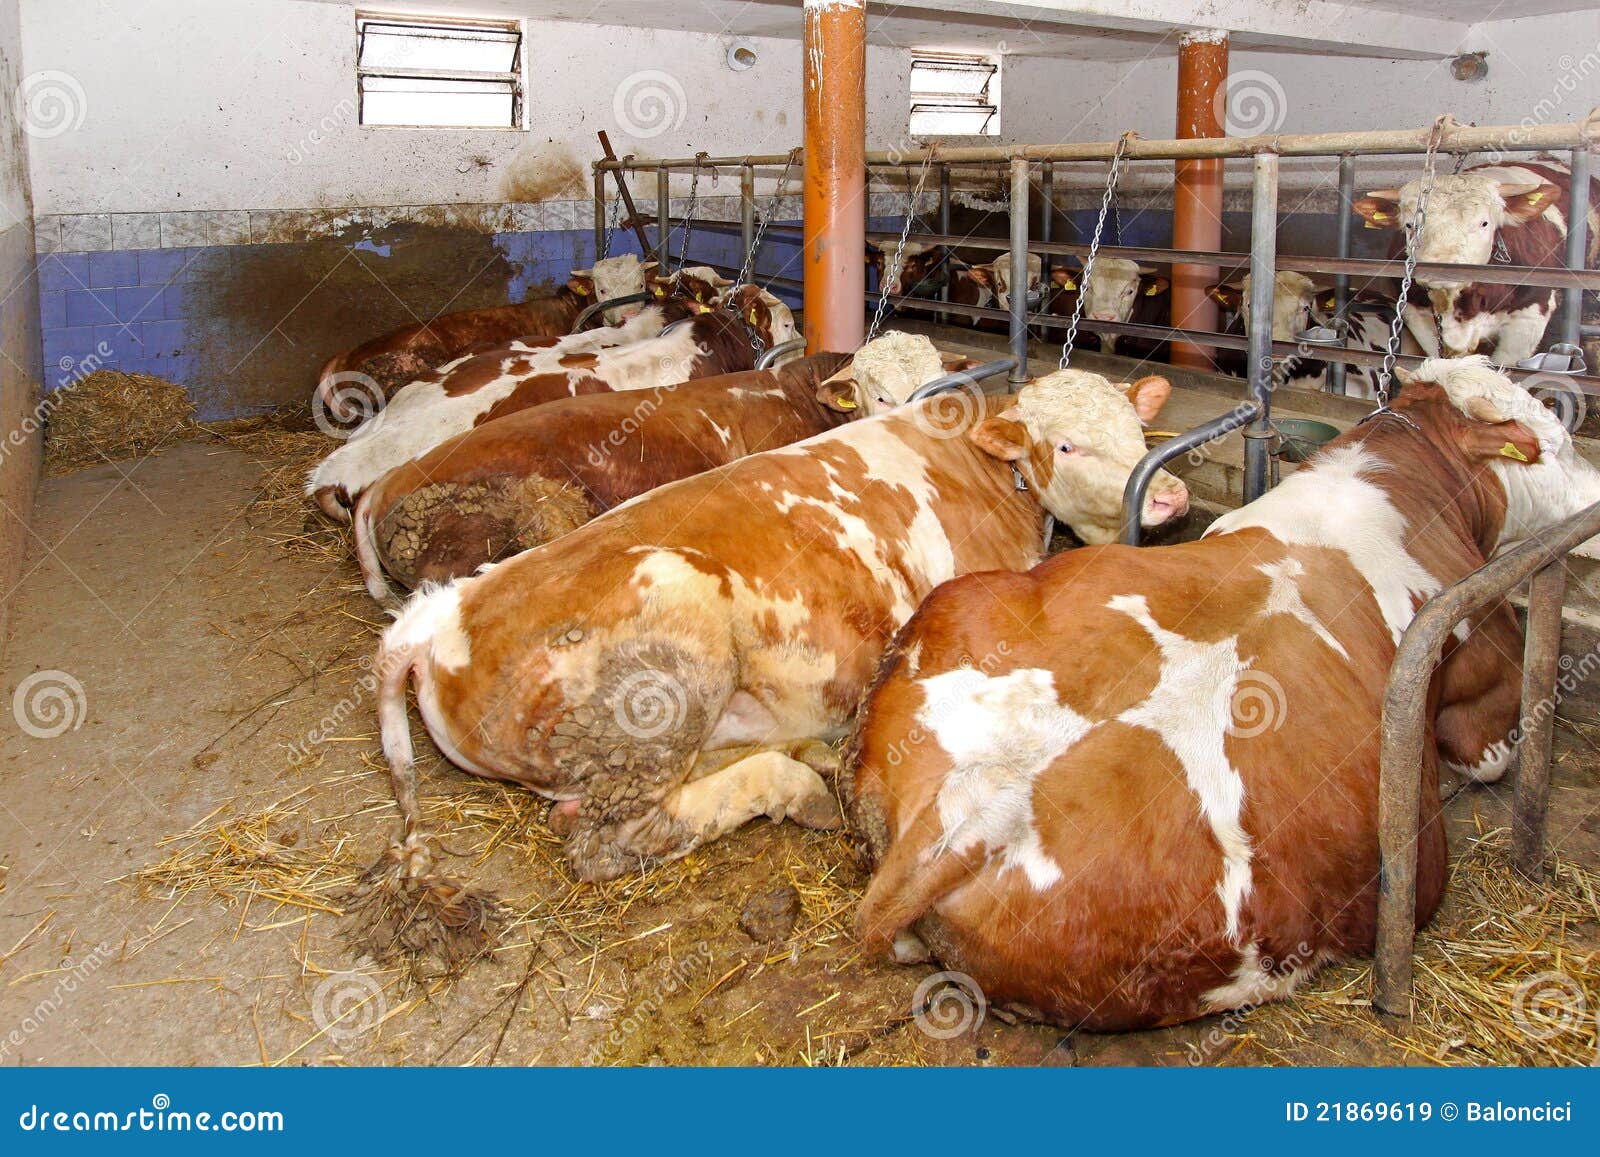 Cow pen stock image. Image of cattle, cows, farming, agriculture - 21869619